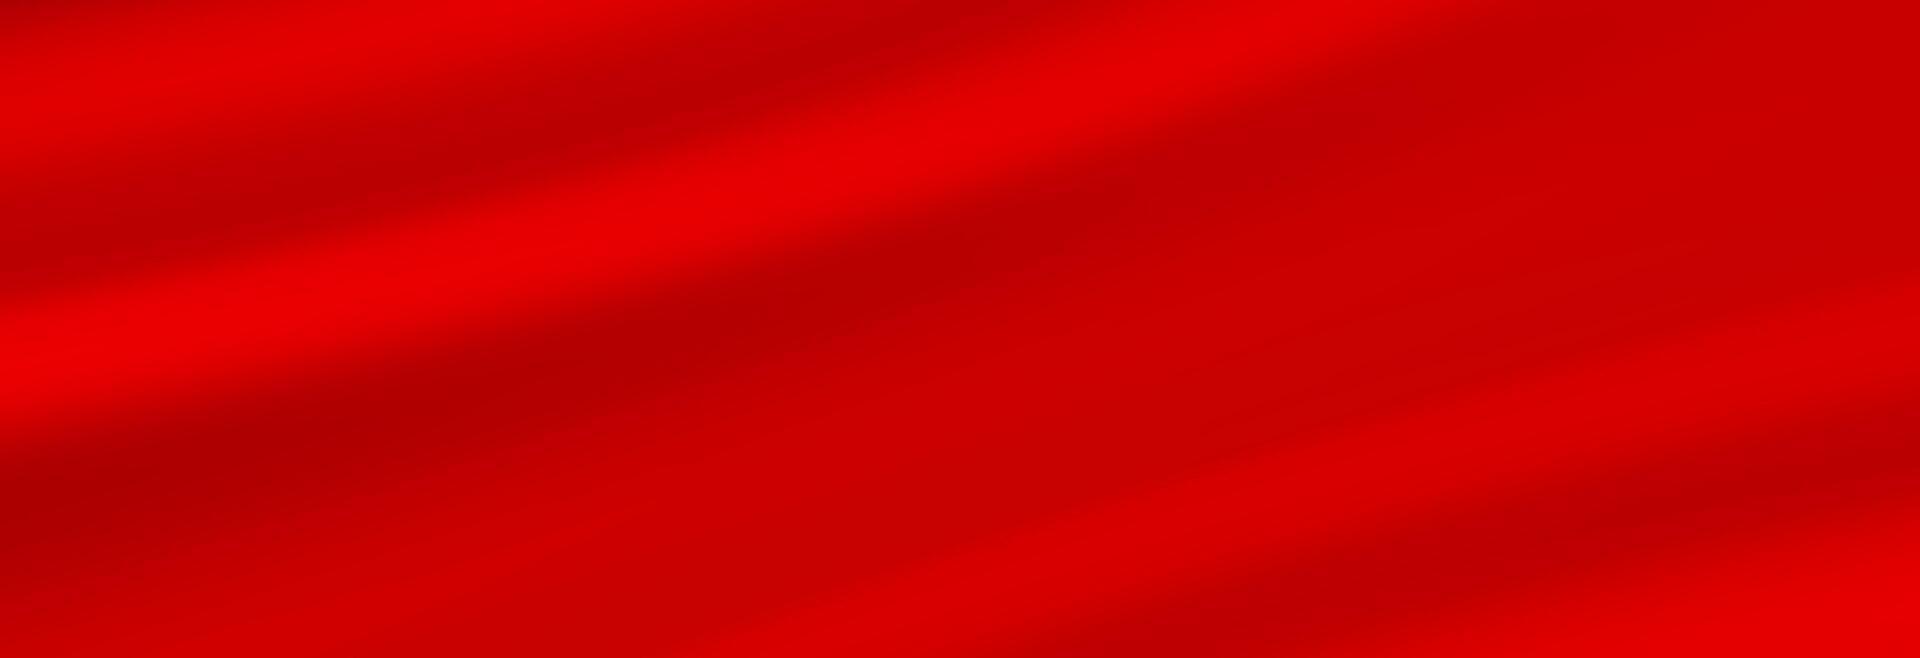 Abstract background, elegant red fabric or liquid waves or folds of satin silk background. Red silk cloth. vector